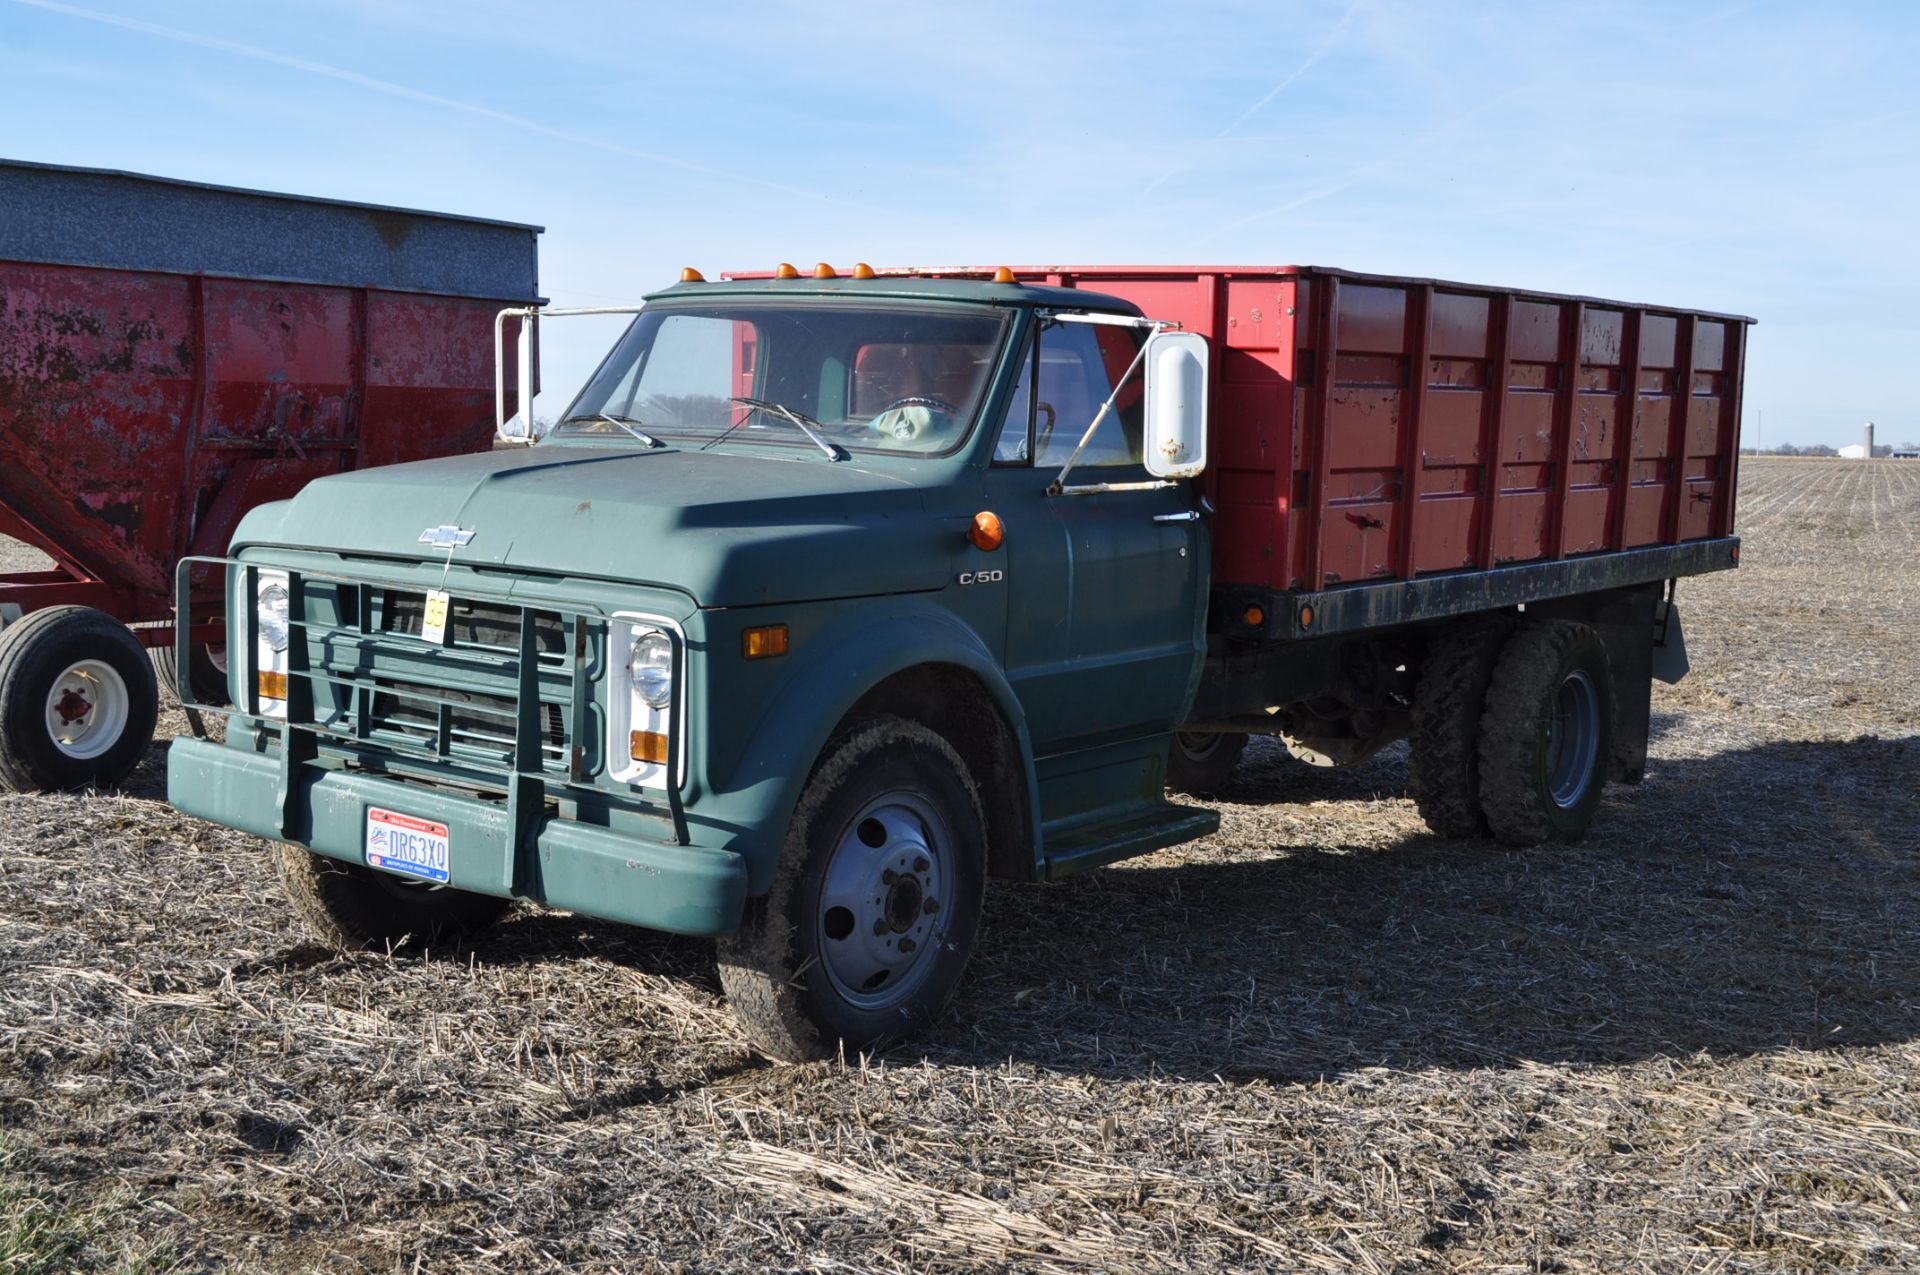 1972 Chevrolet C50 straight truck, V8 gas 350 engine, 5+2, hyd brakes, 8.25-20 tires, 15’ bed w/ - Image 2 of 19